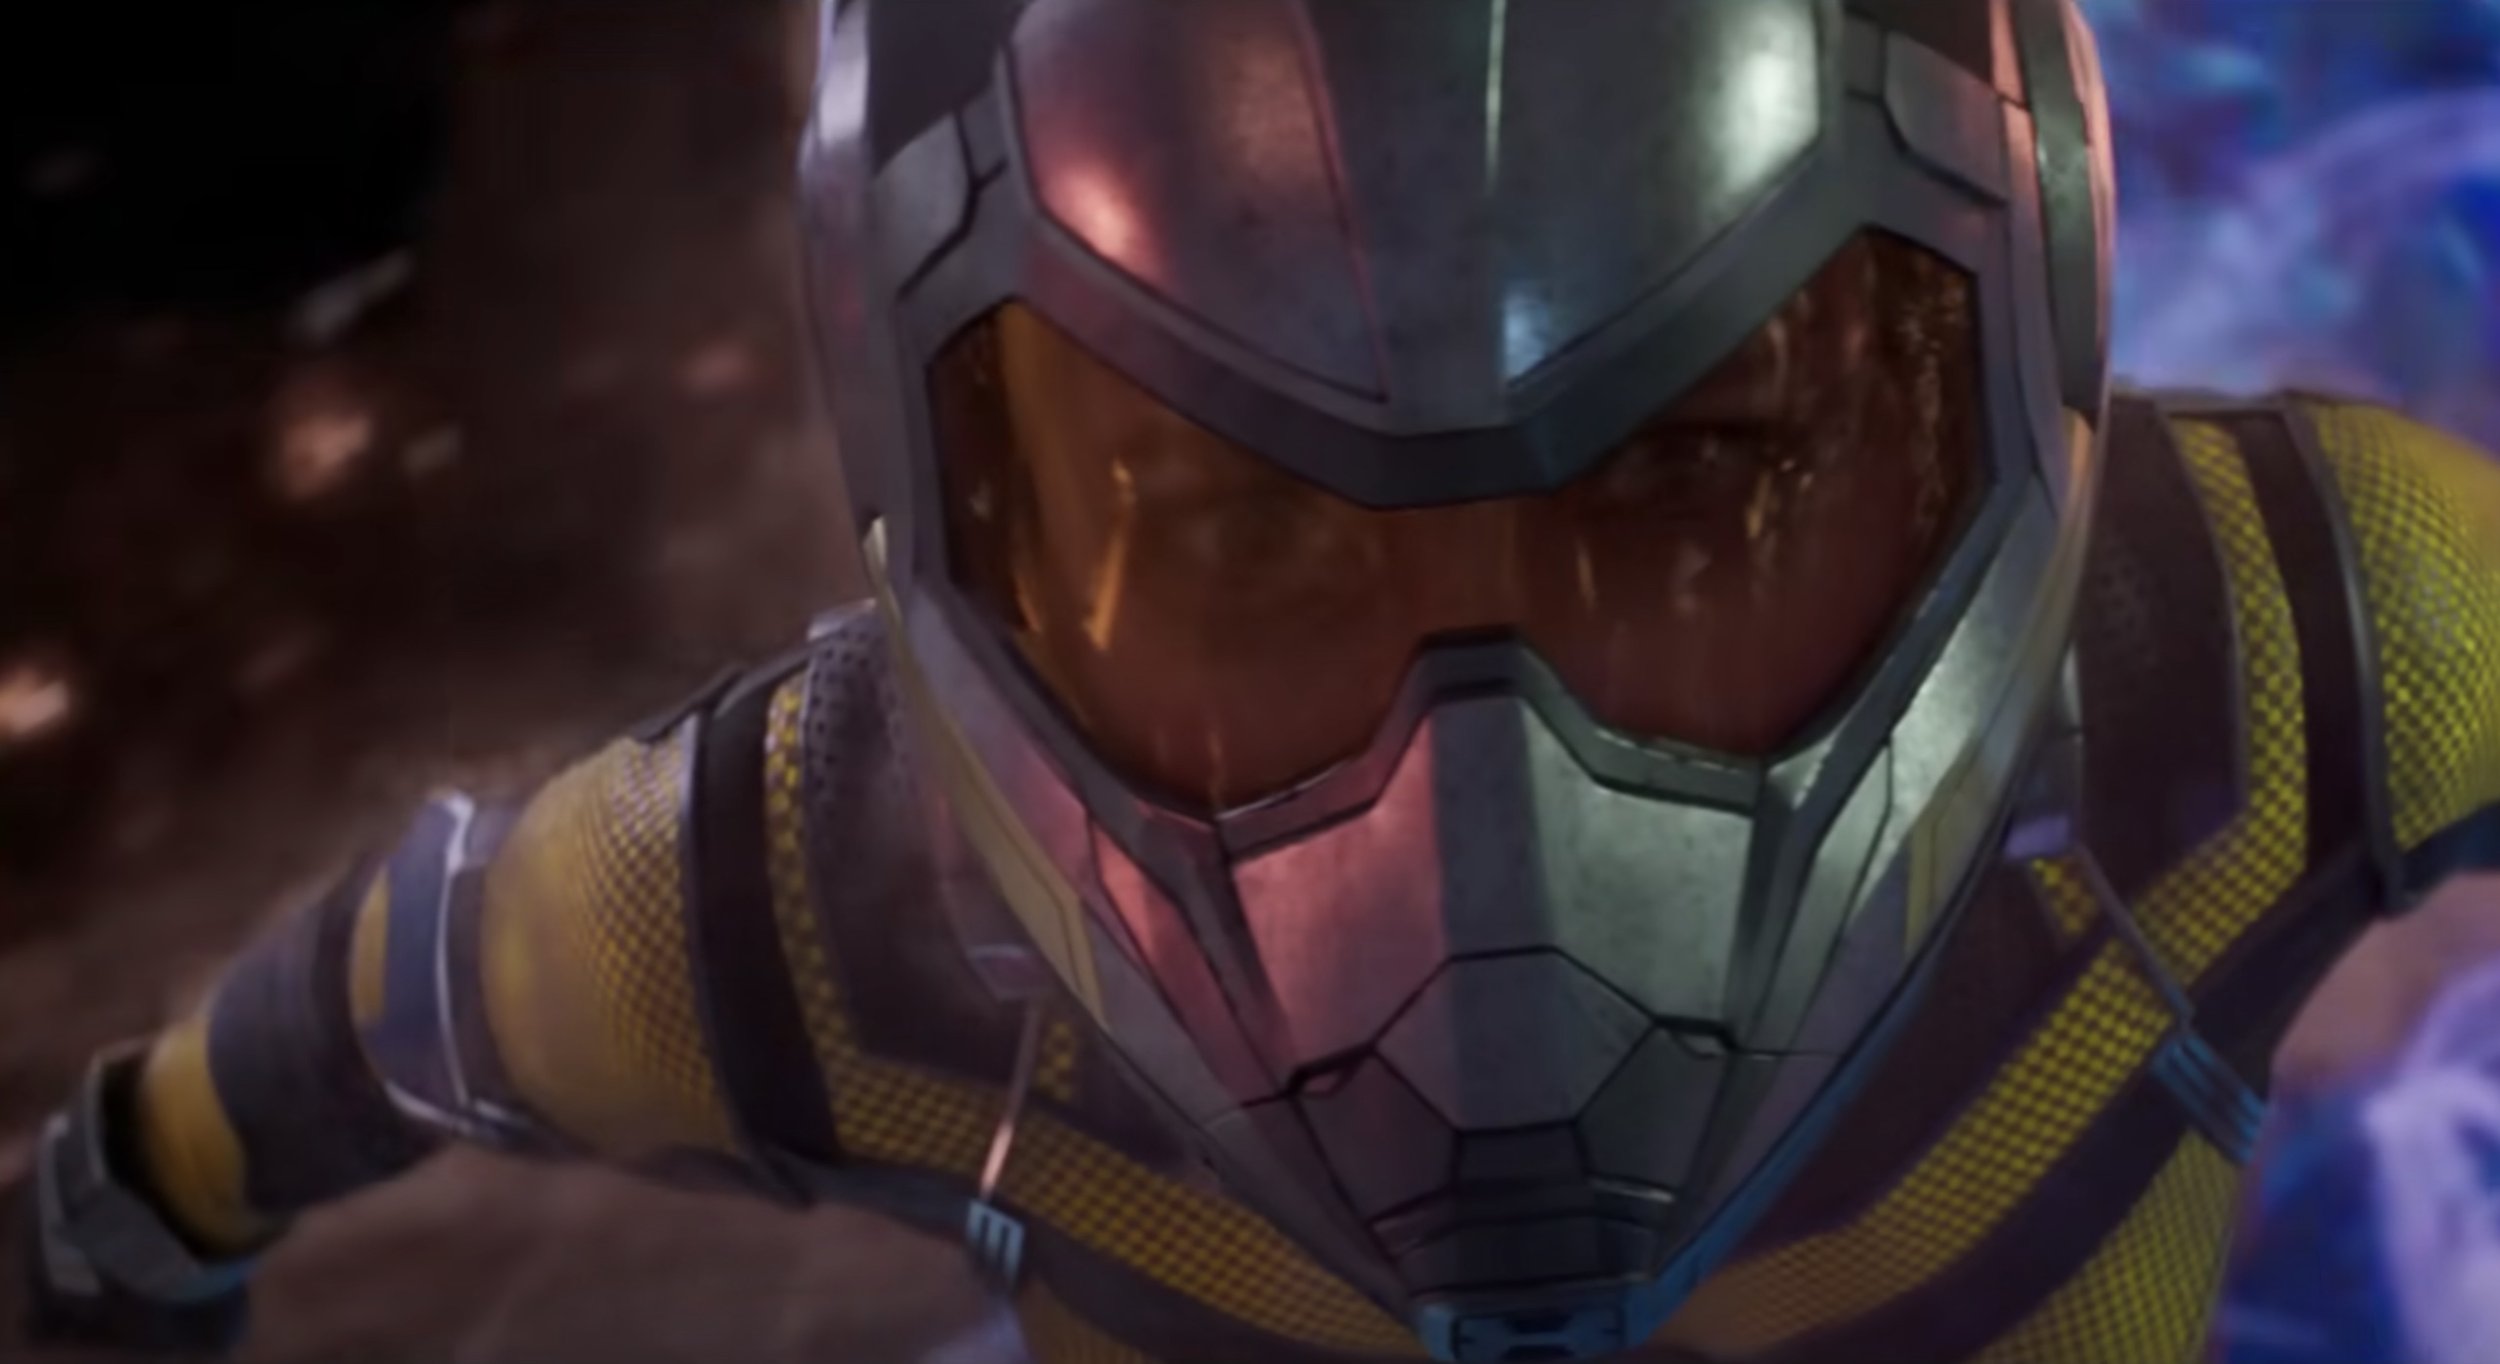 Ant-Man and the Wasp: Quantumania Trailer: Kang the Conqueror Is Here